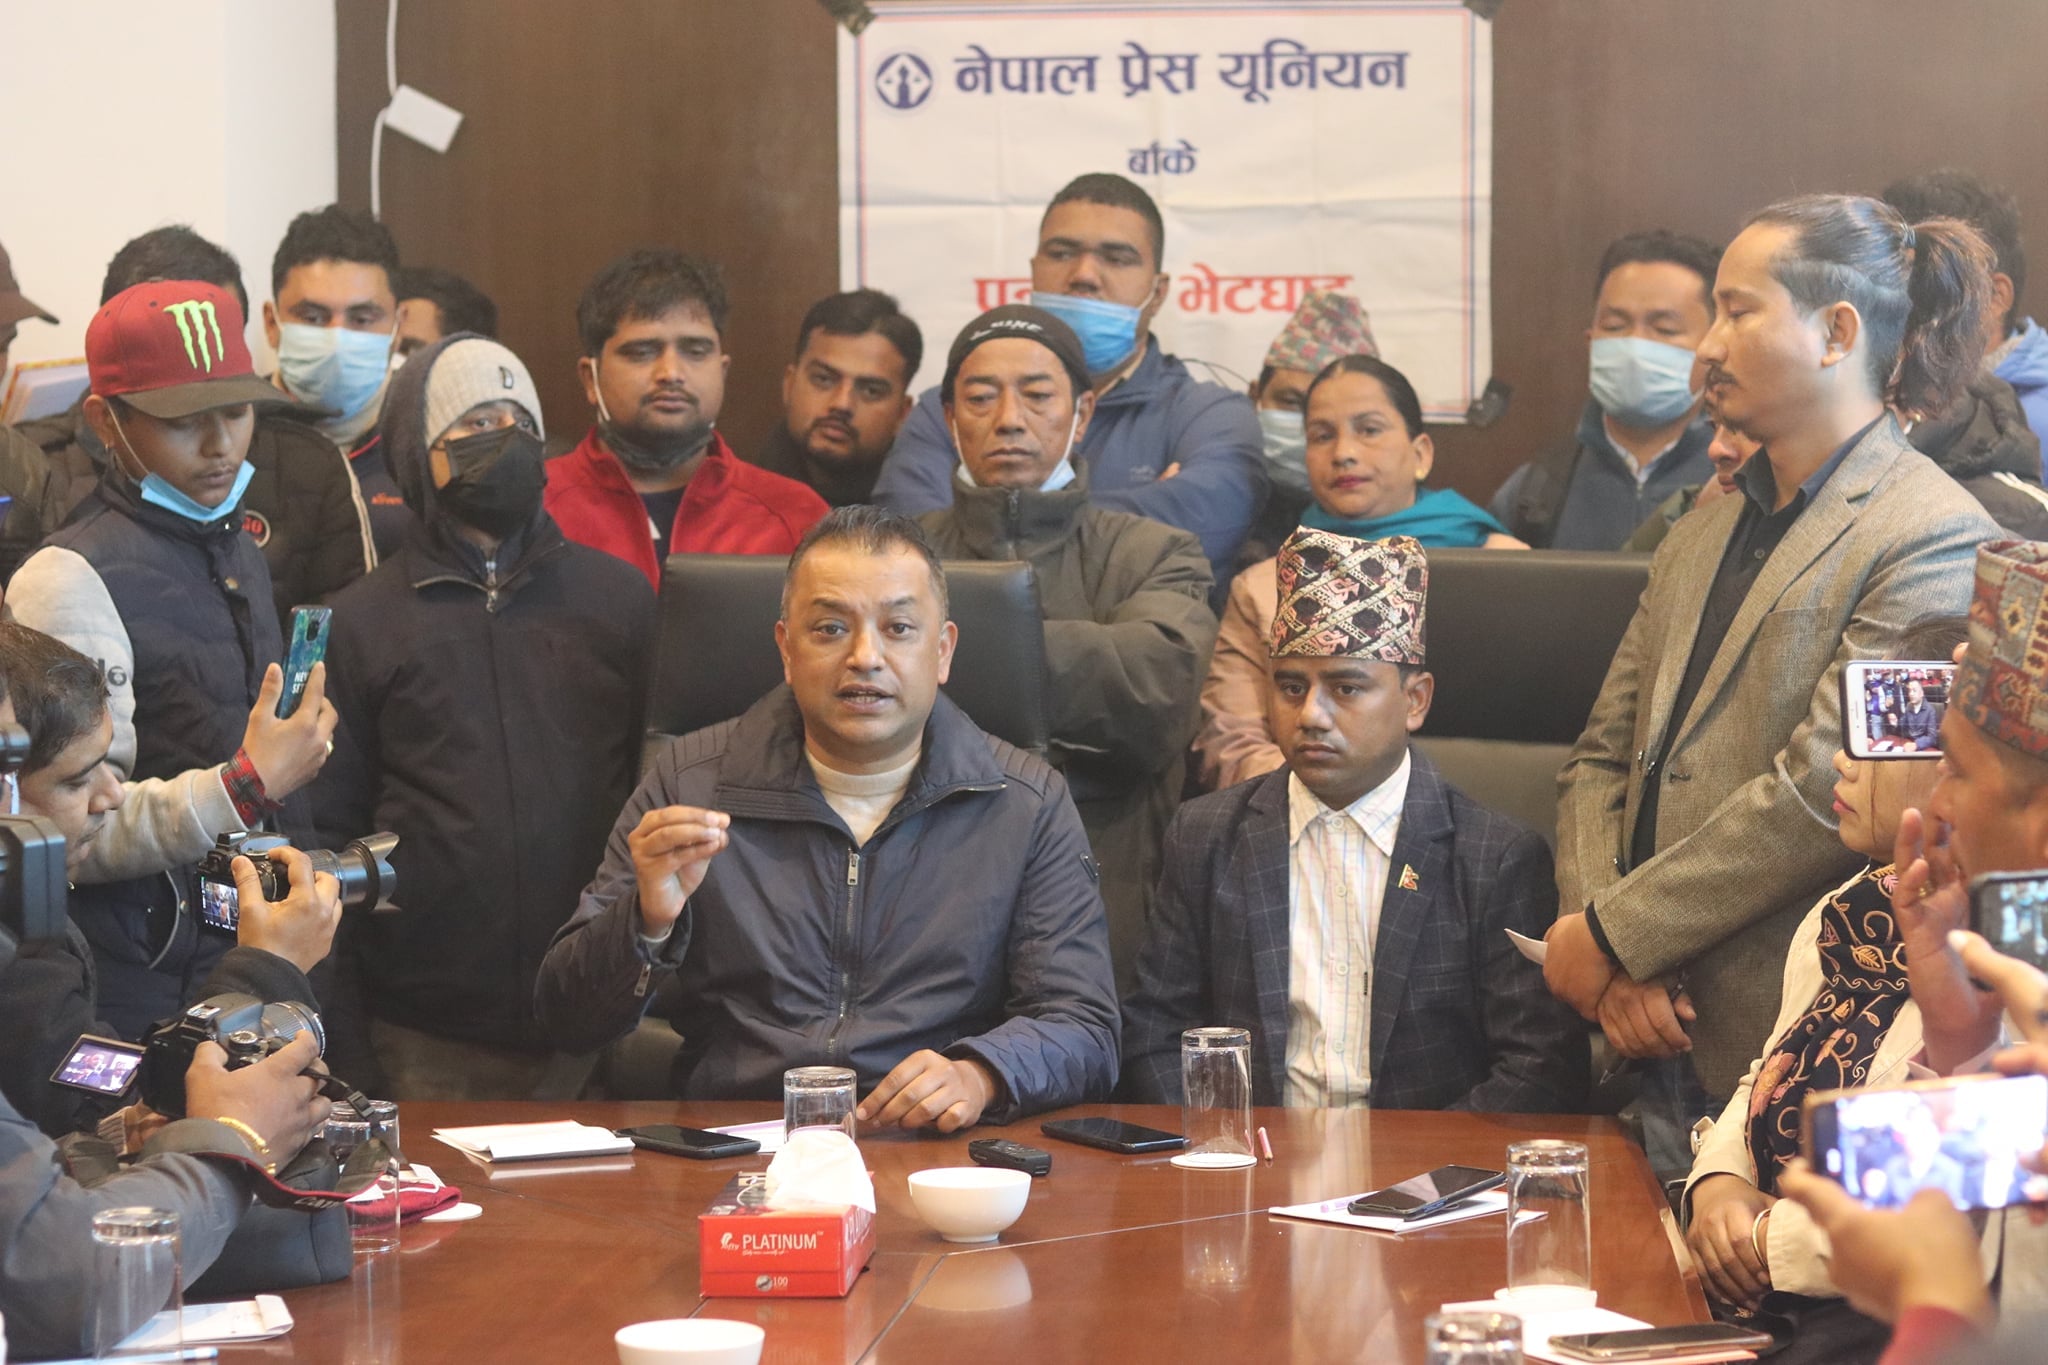 Nepali Congress leader Gagan Thapa interacting with mediapersons at a press meet organised by Nepal Press Union, in Banke, on Tuesday, December 29, 2020. Photo: Tilak Gaunle/THT 